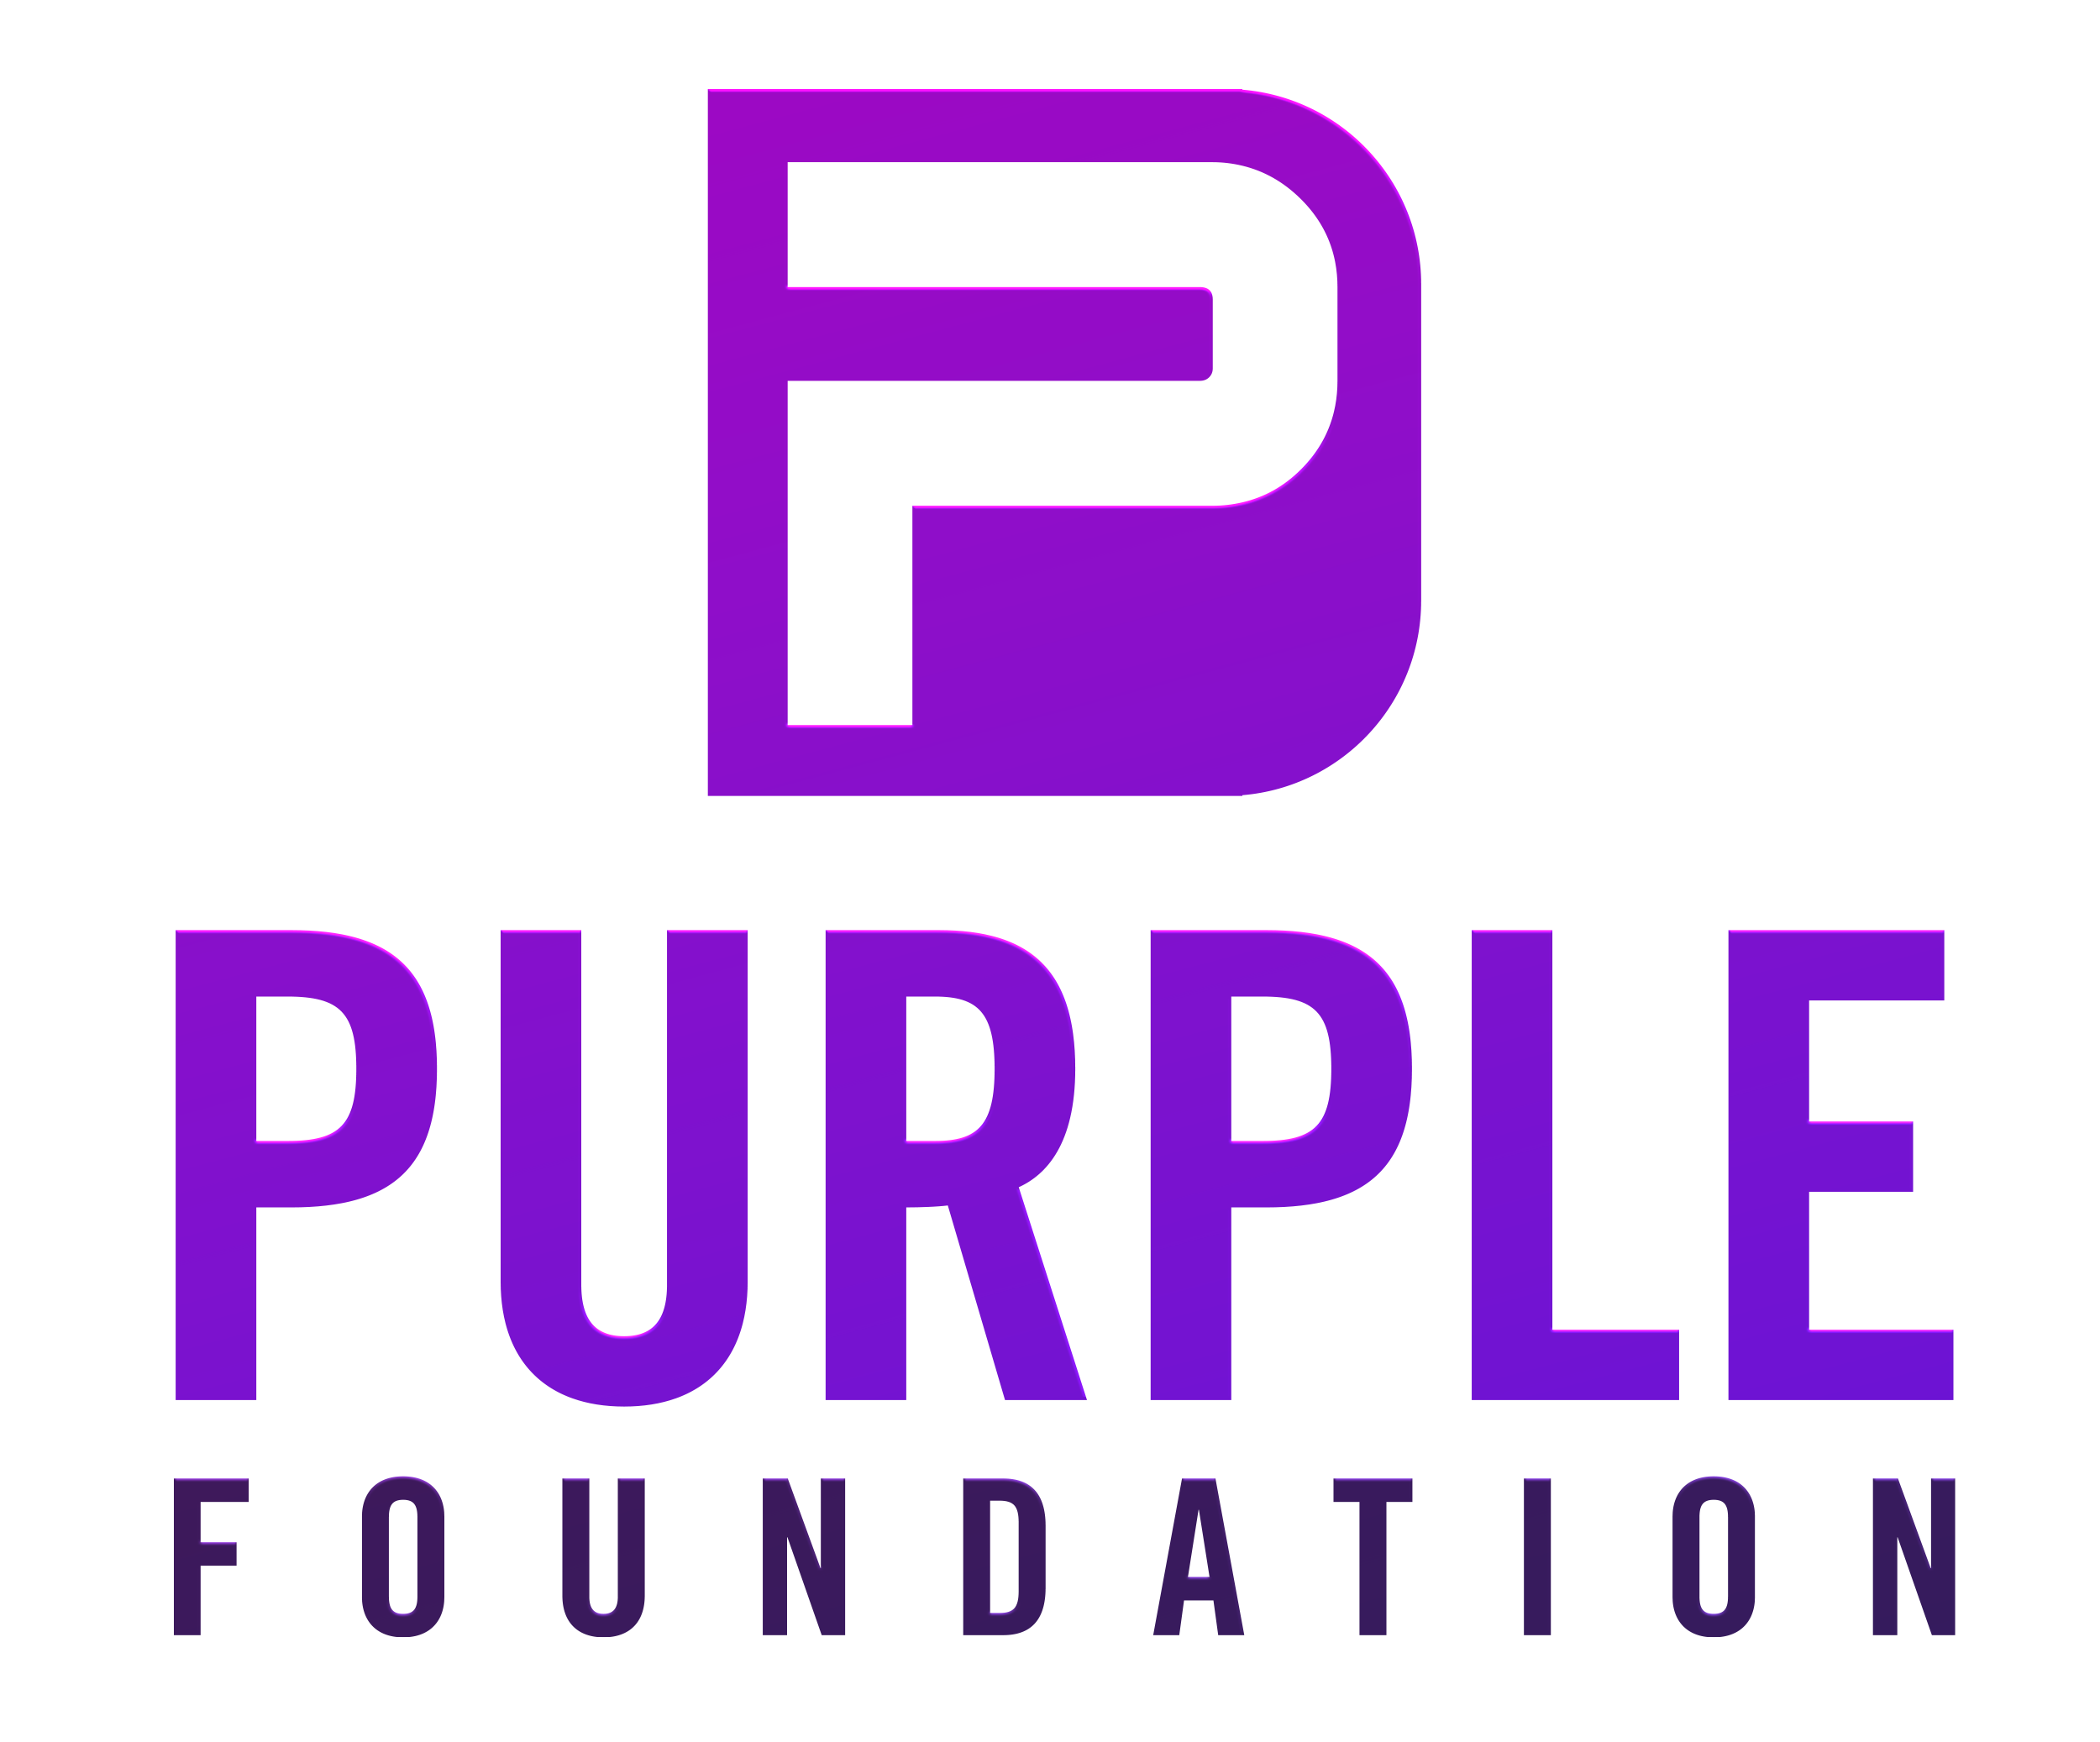 vibrant purple P logo with text underneath in Puple and black reading Purple Foundation